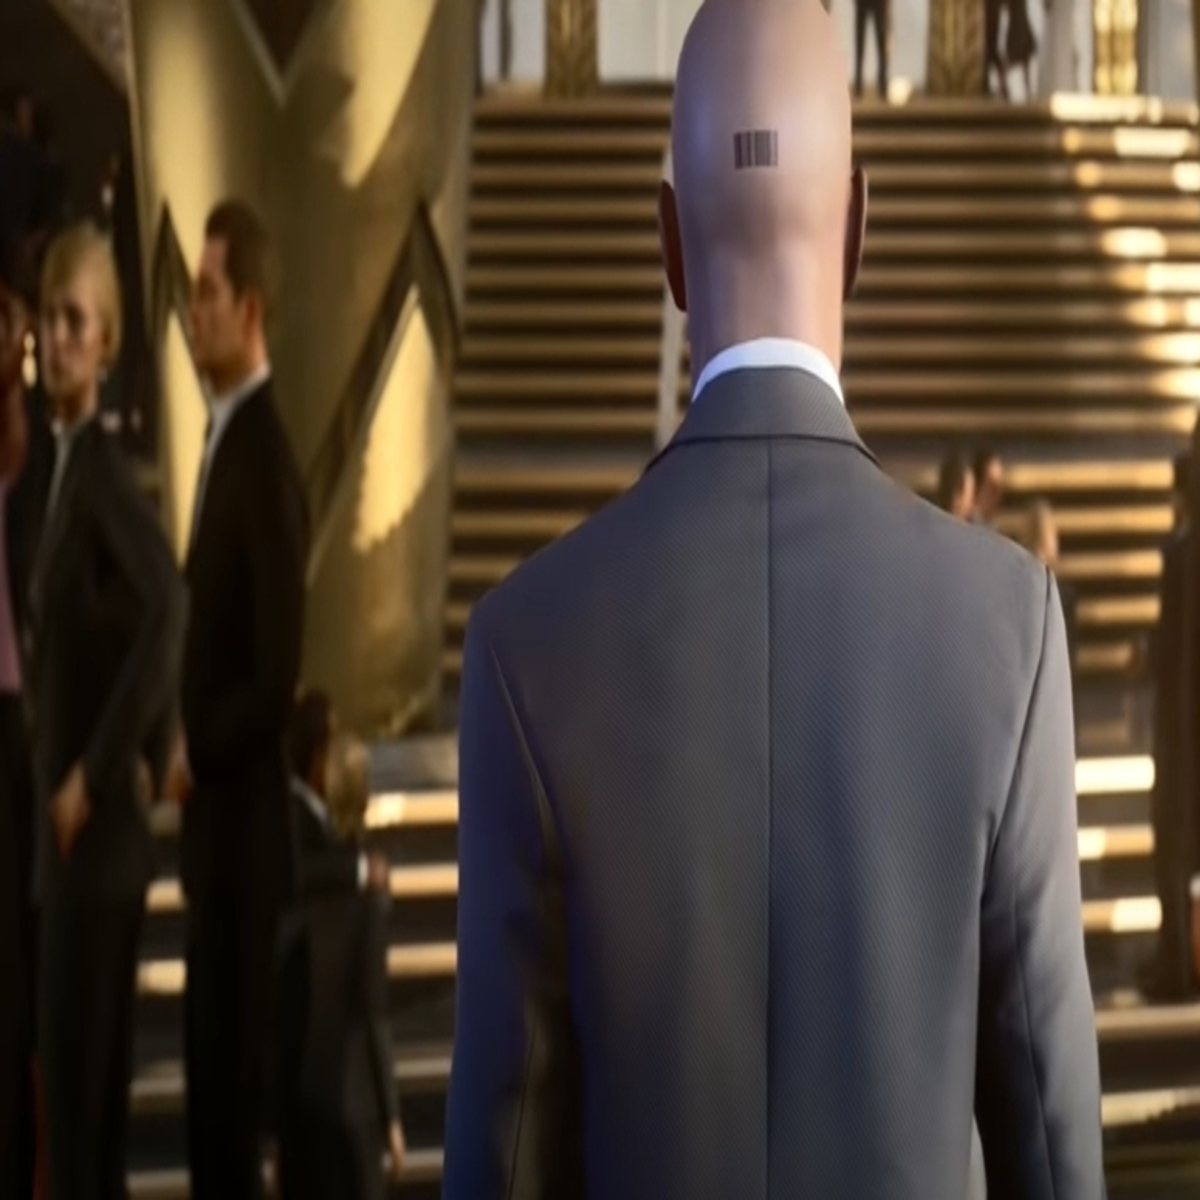 NOW AVAILABLE: Physical Deluxe Editions of IO Interactive's HITMAN 3! –  Limited Run Games